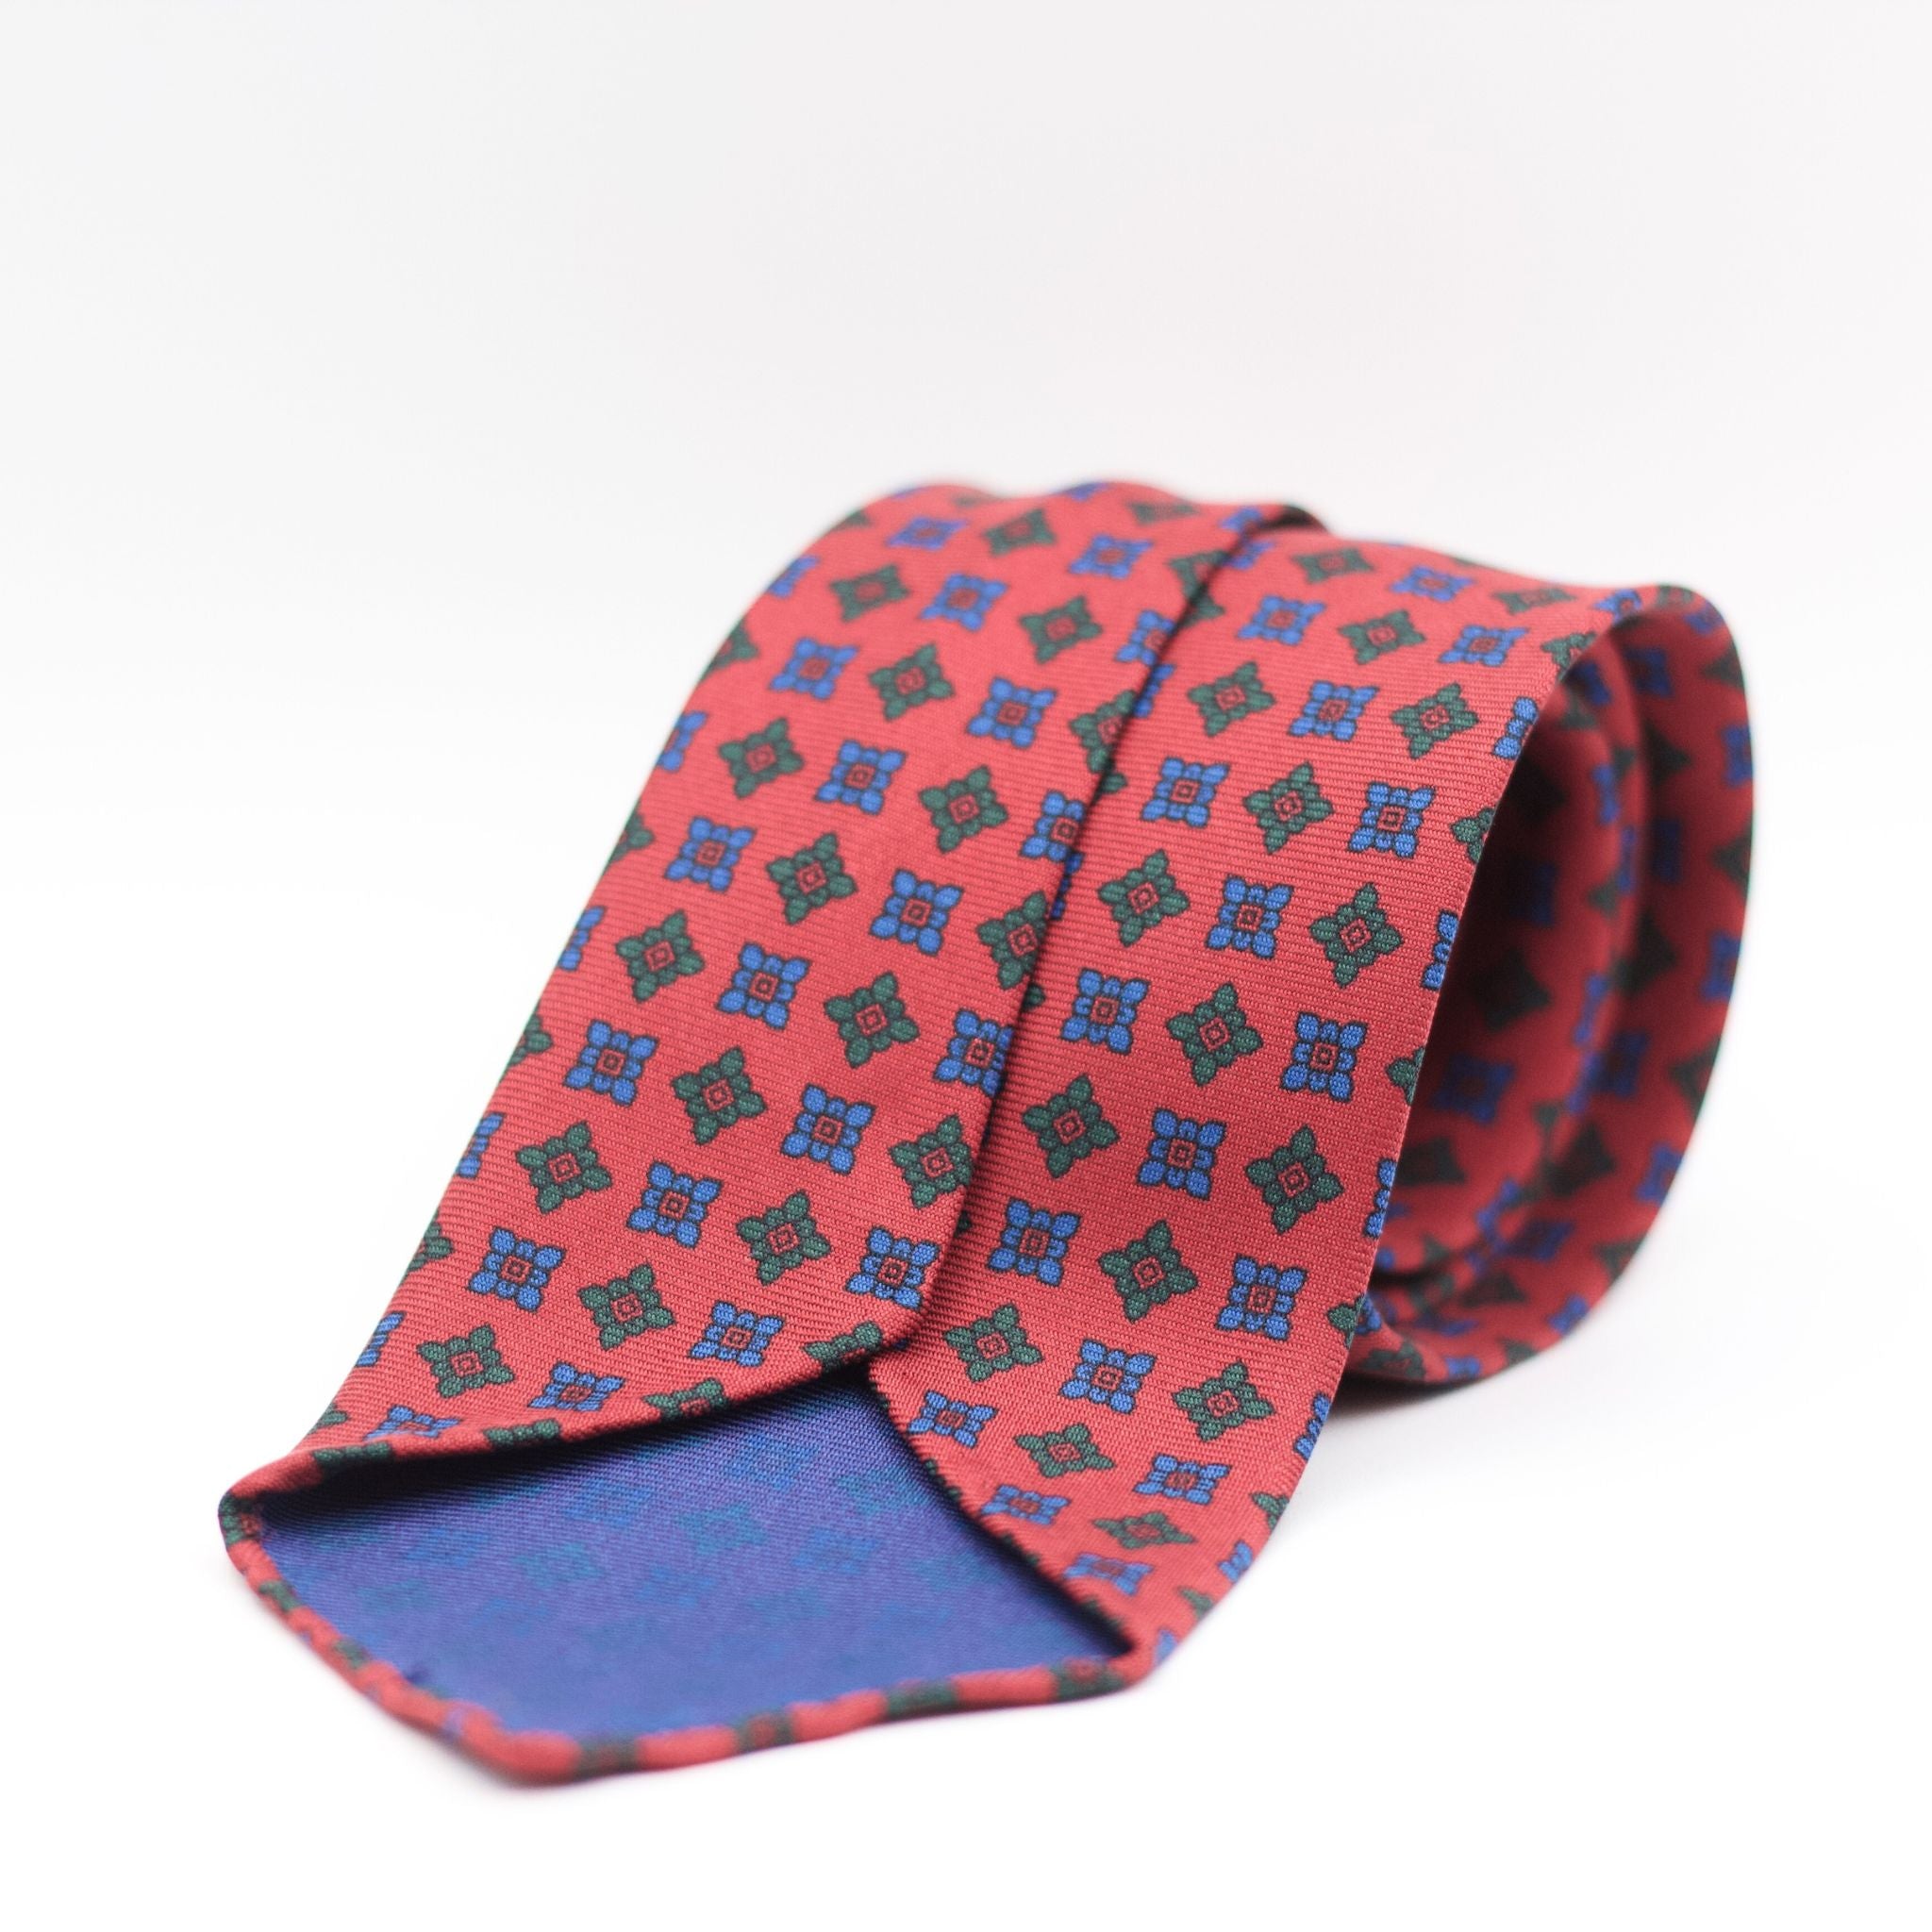 Cruciani & Bella 100% Printed Silk Unlined Red, Green and Blue Motif Unlined Tie Handmade in England 8 x 153 cm